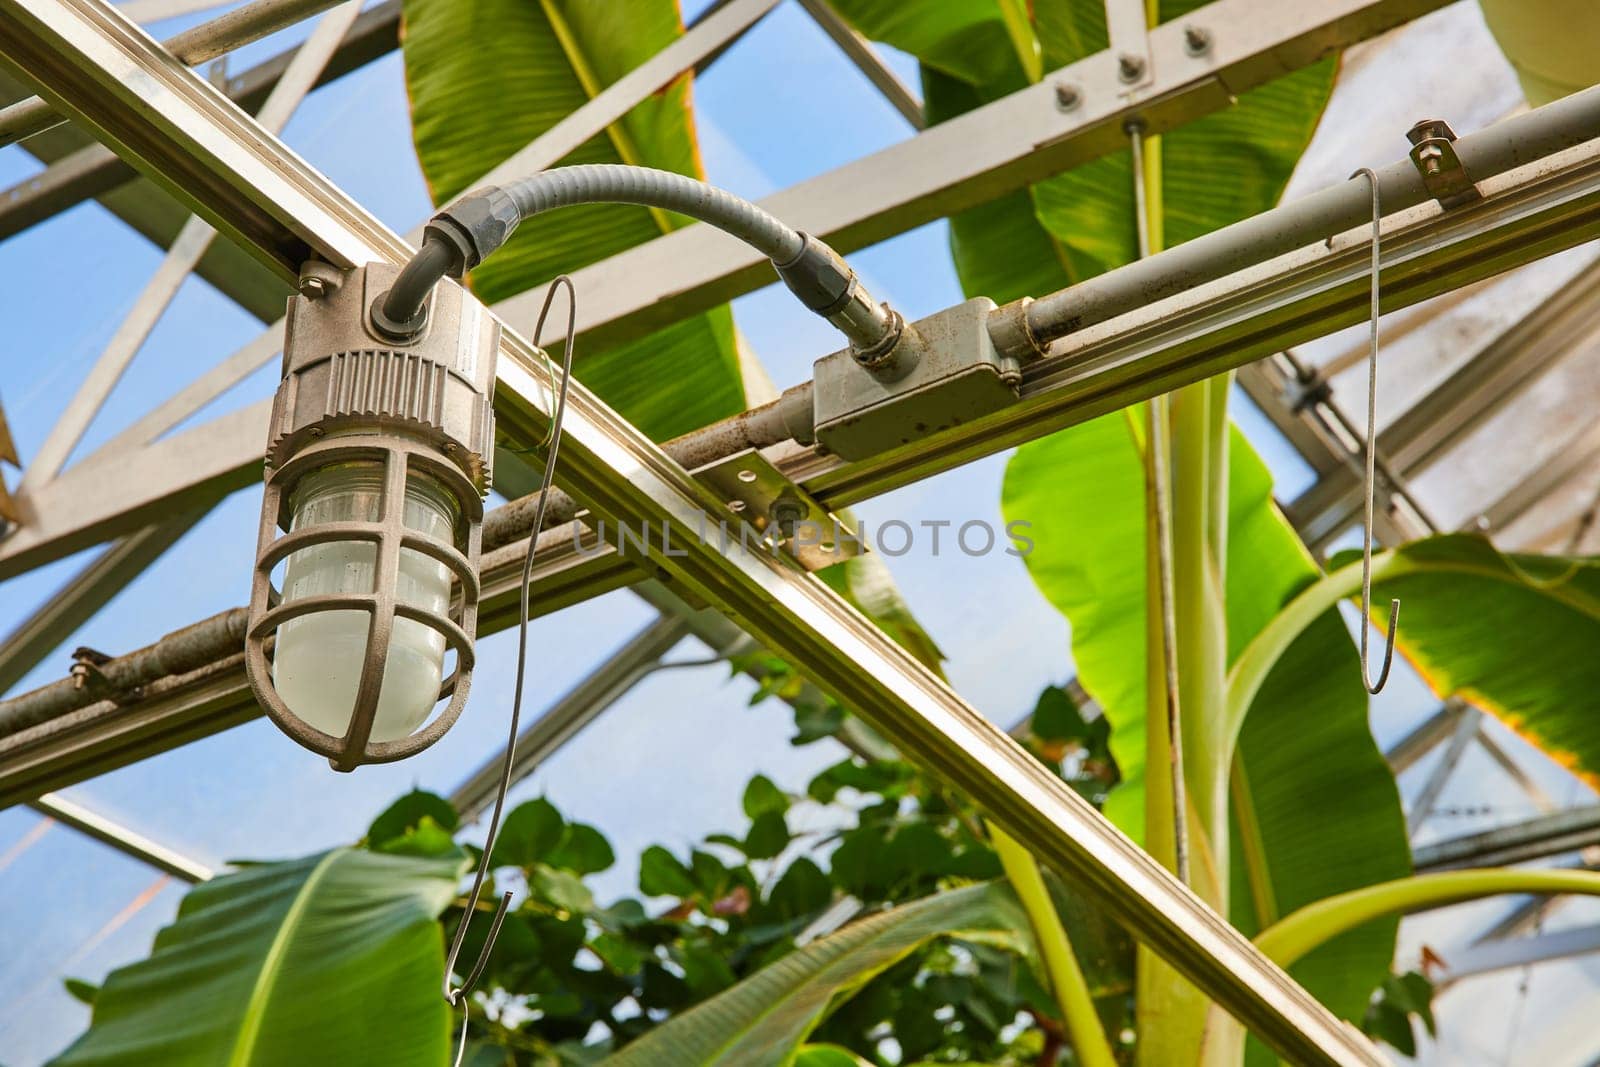 Greenhouse Growth and Industrial Lighting, Upward View by njproductions